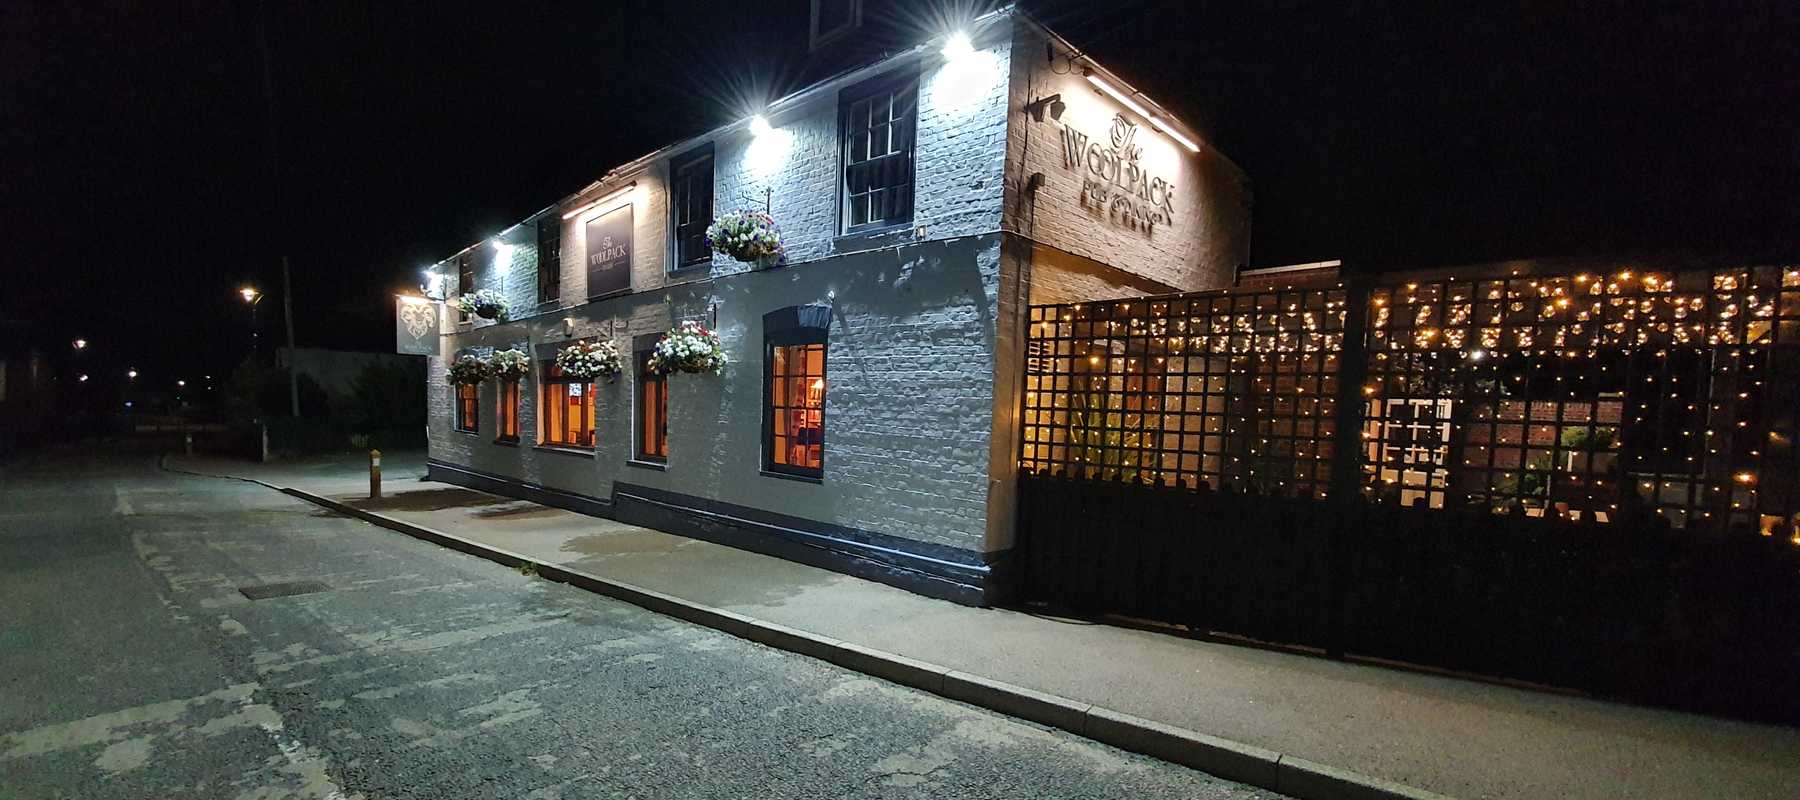 Out side night time view of the woolpack